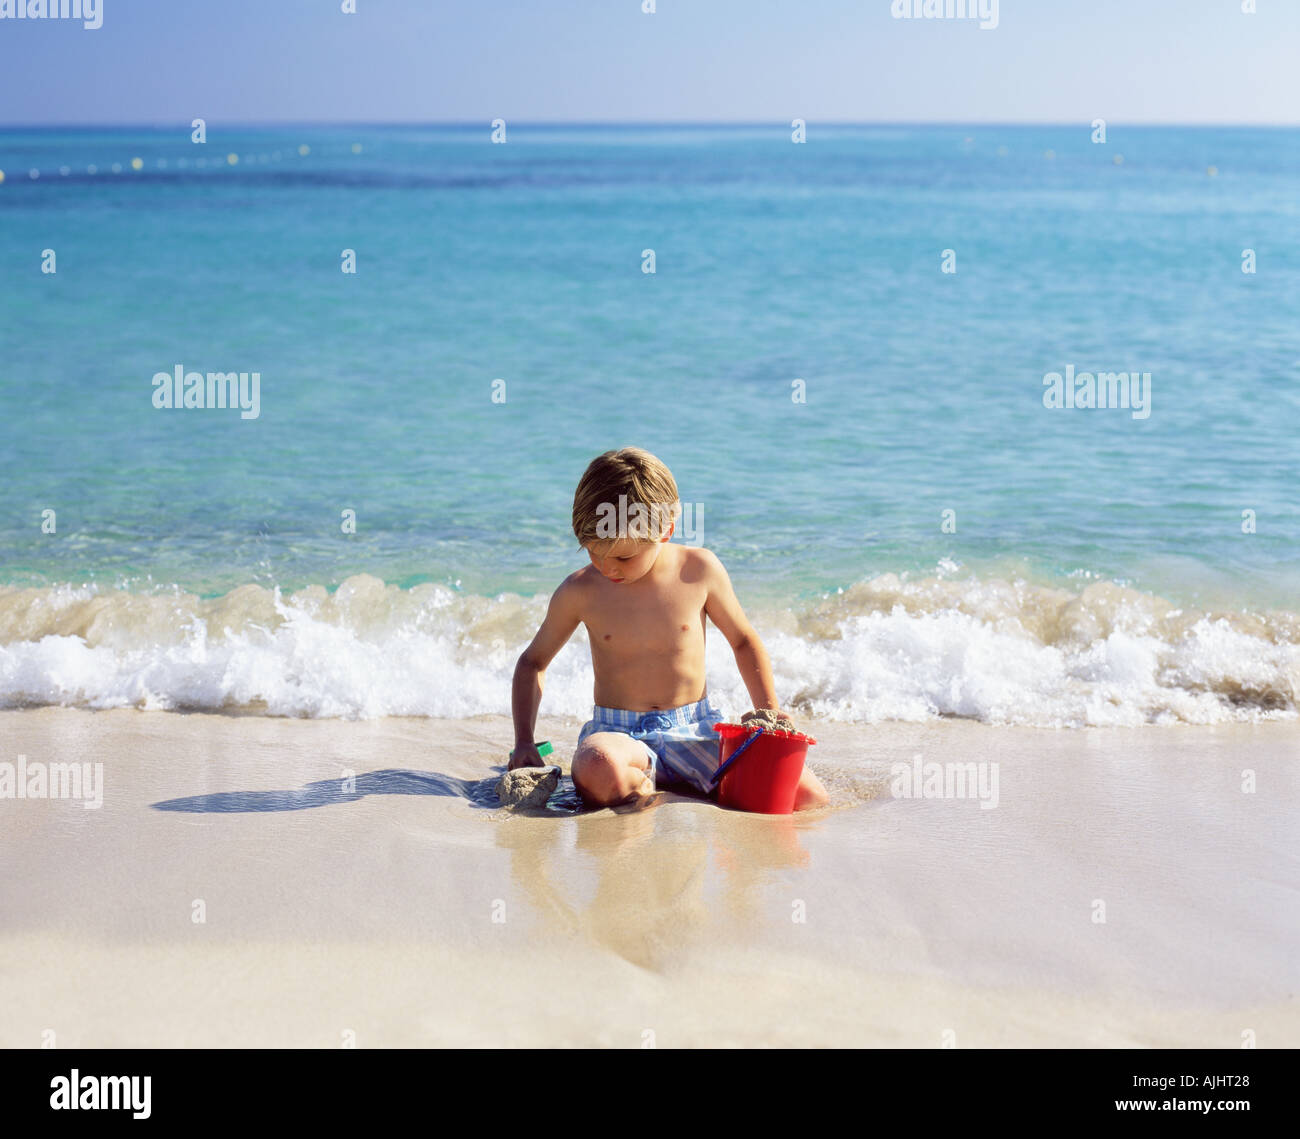 Boy playing with wet sand Stock Photo